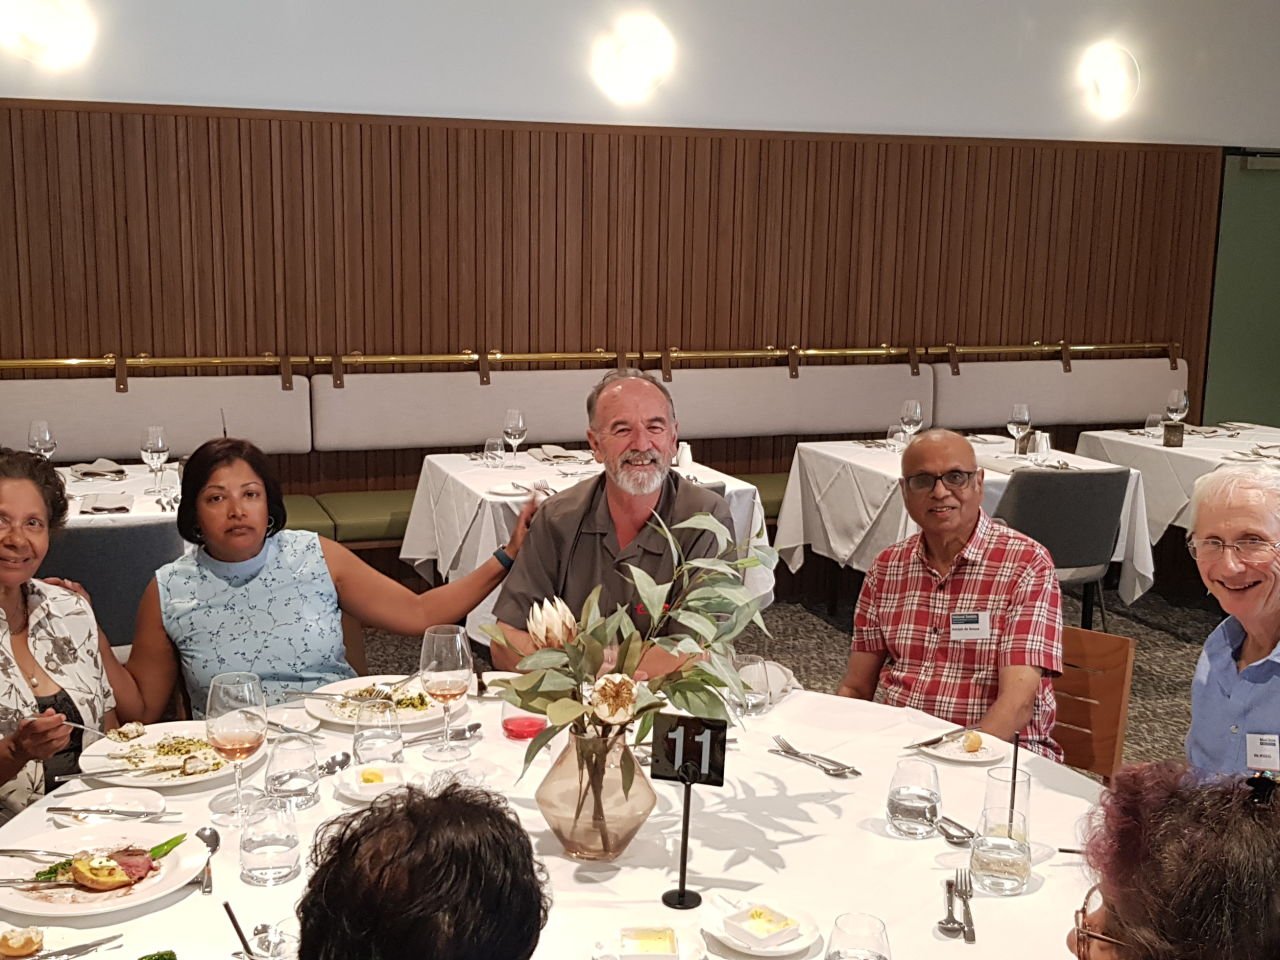 Some Perth Branch Members at the Saltbush Restaurant: Carmen, Pauline, Thomas, Adolph and Mal Hordern from Western Suburbs